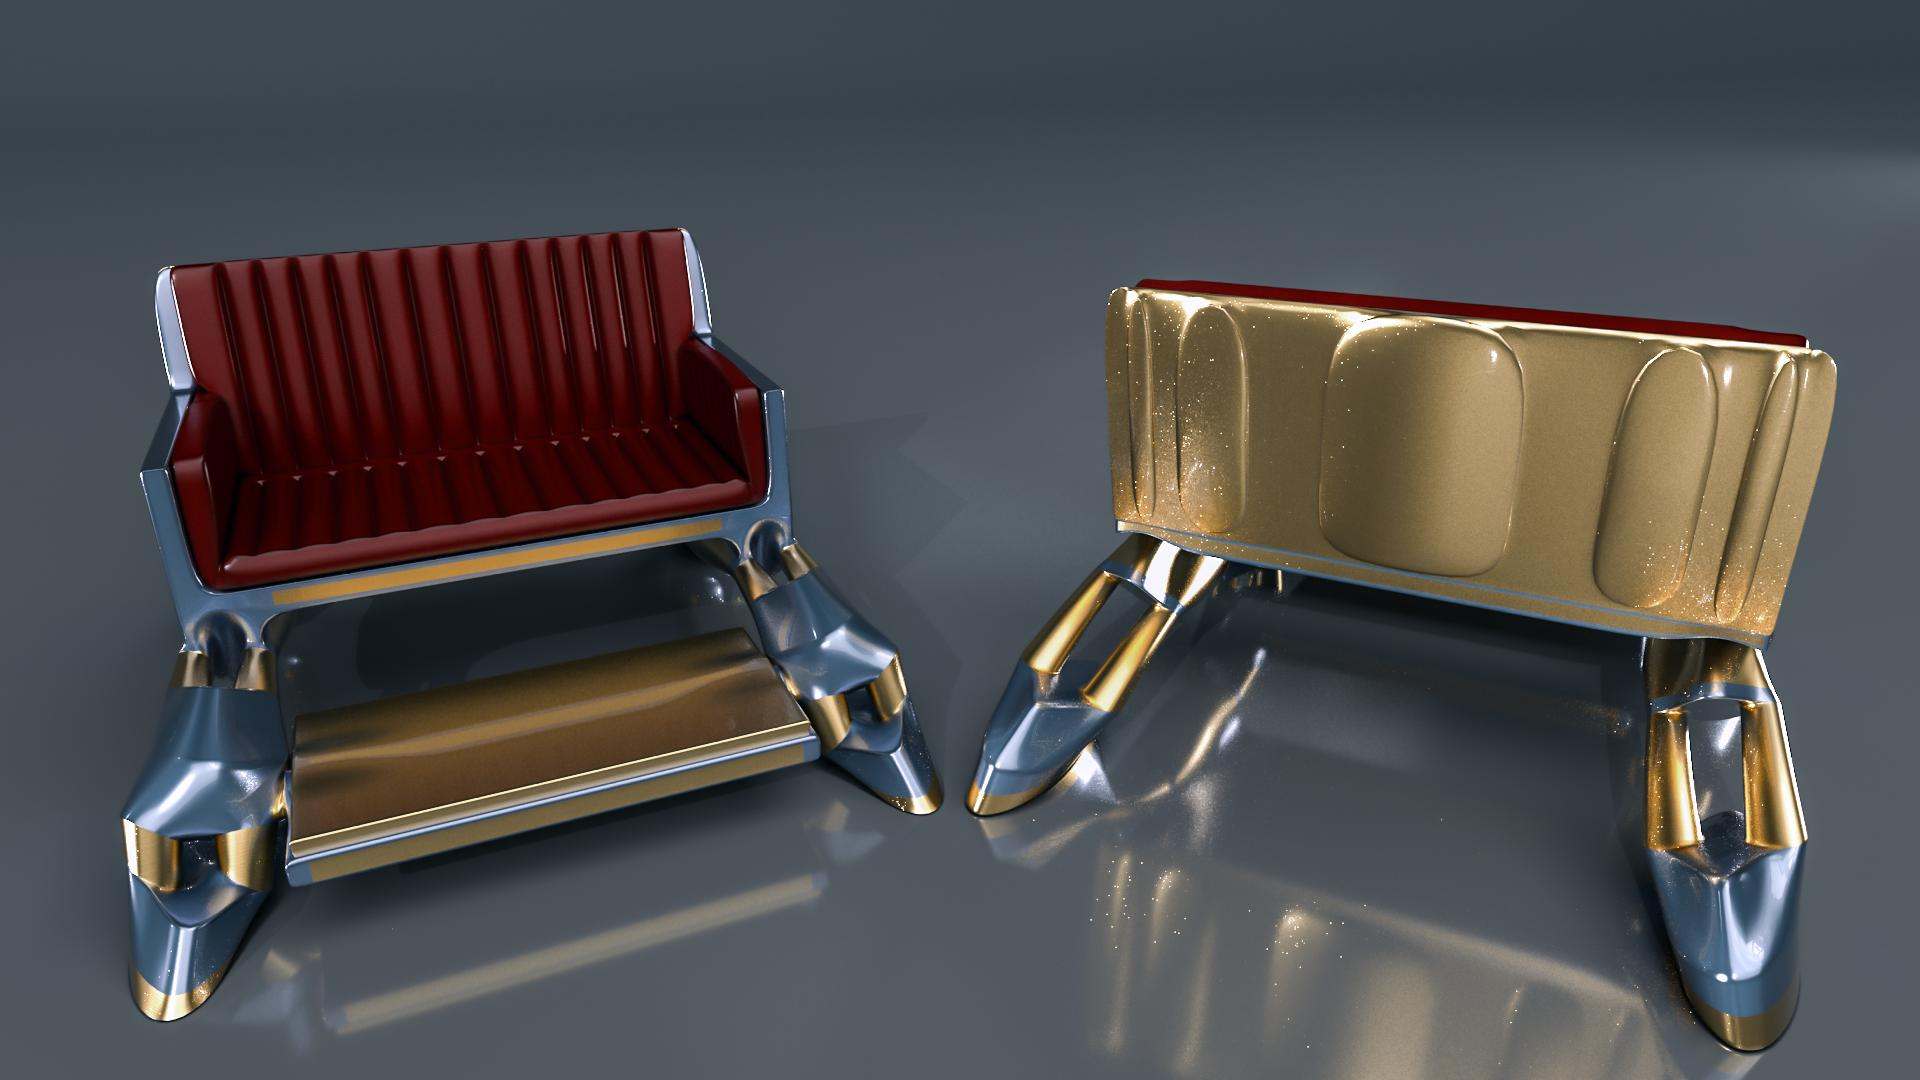 industrialdesign16 Industrial Design Modeled and Rendered in Modo by Mike Grauer